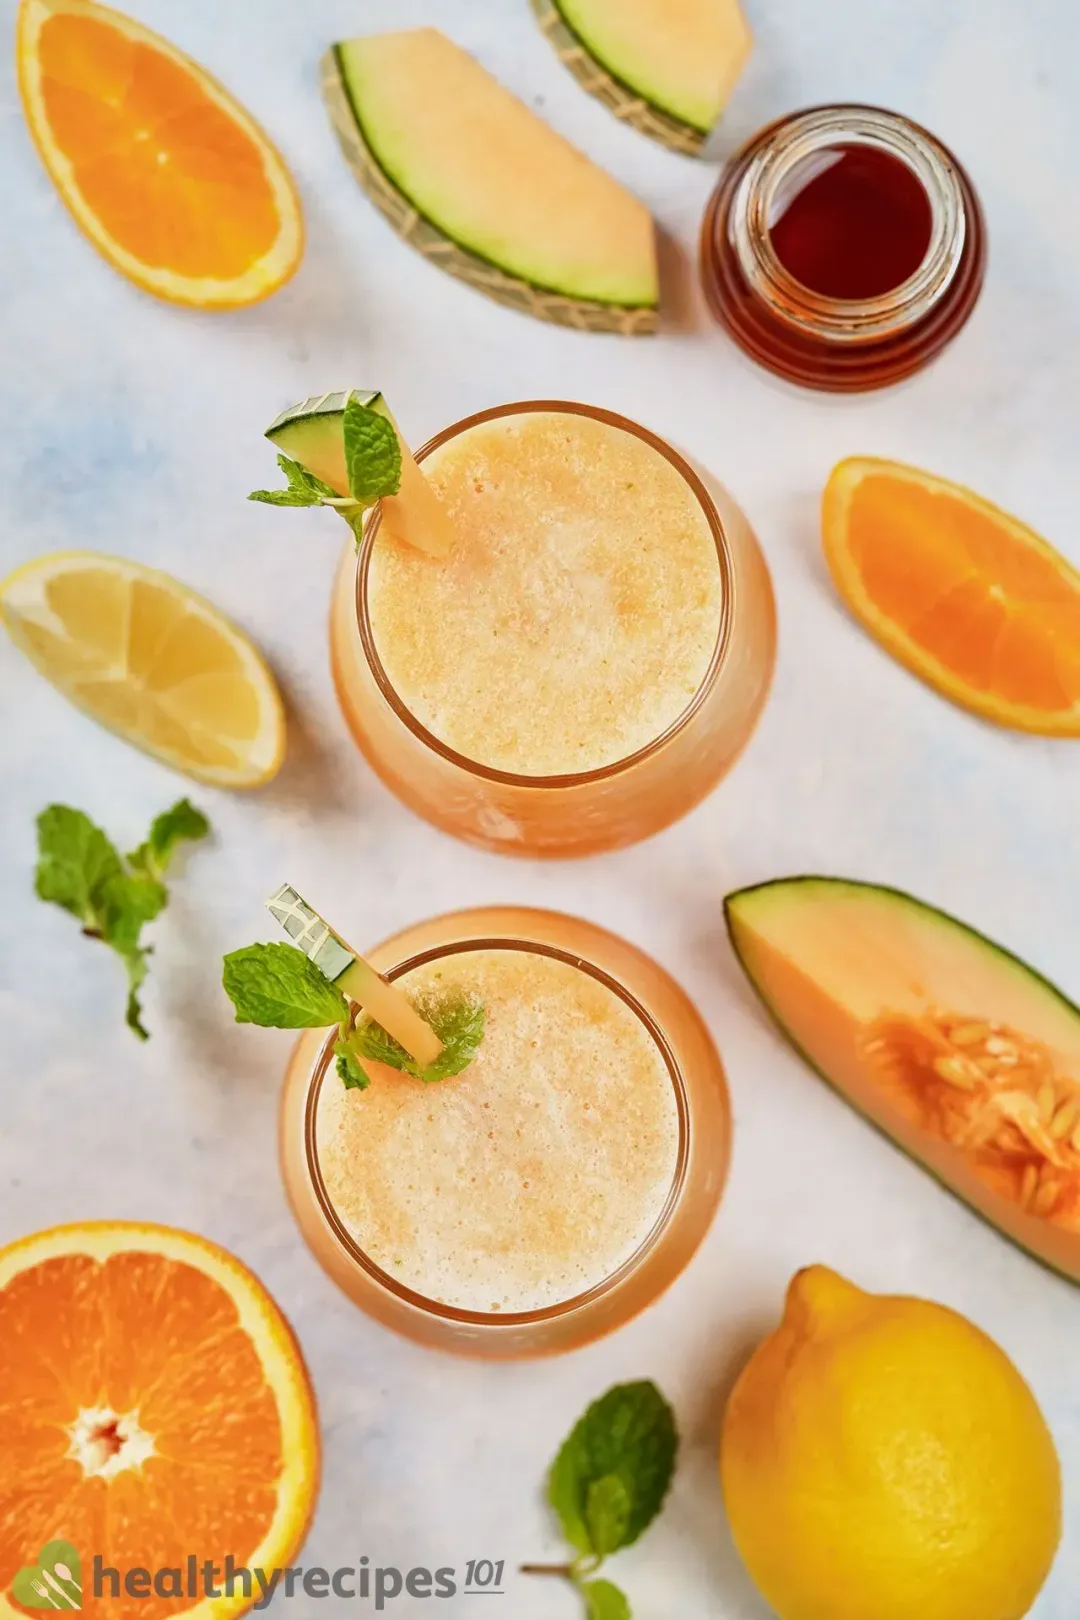 Tips on How to Garnish a Cantaloupe Smoothie